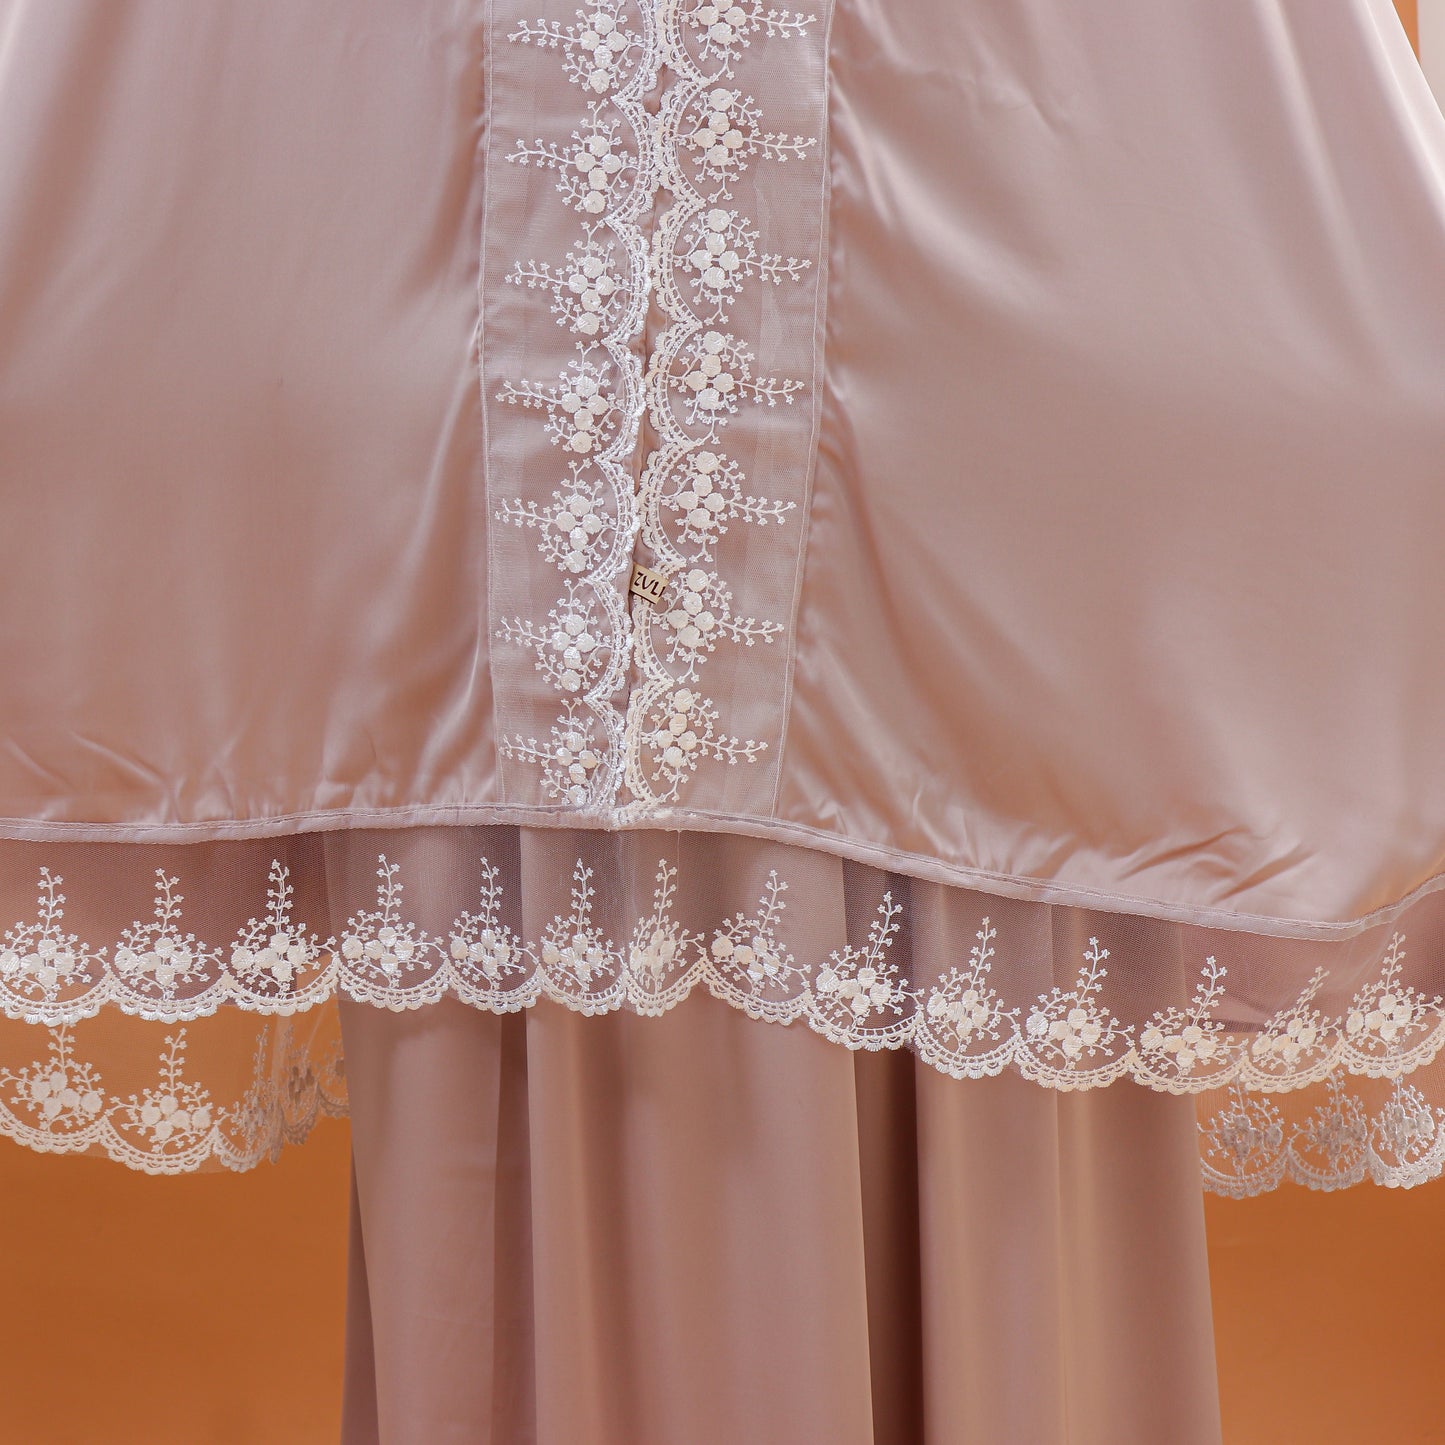 Ladies Prayer Clothes with Lace - Fawn